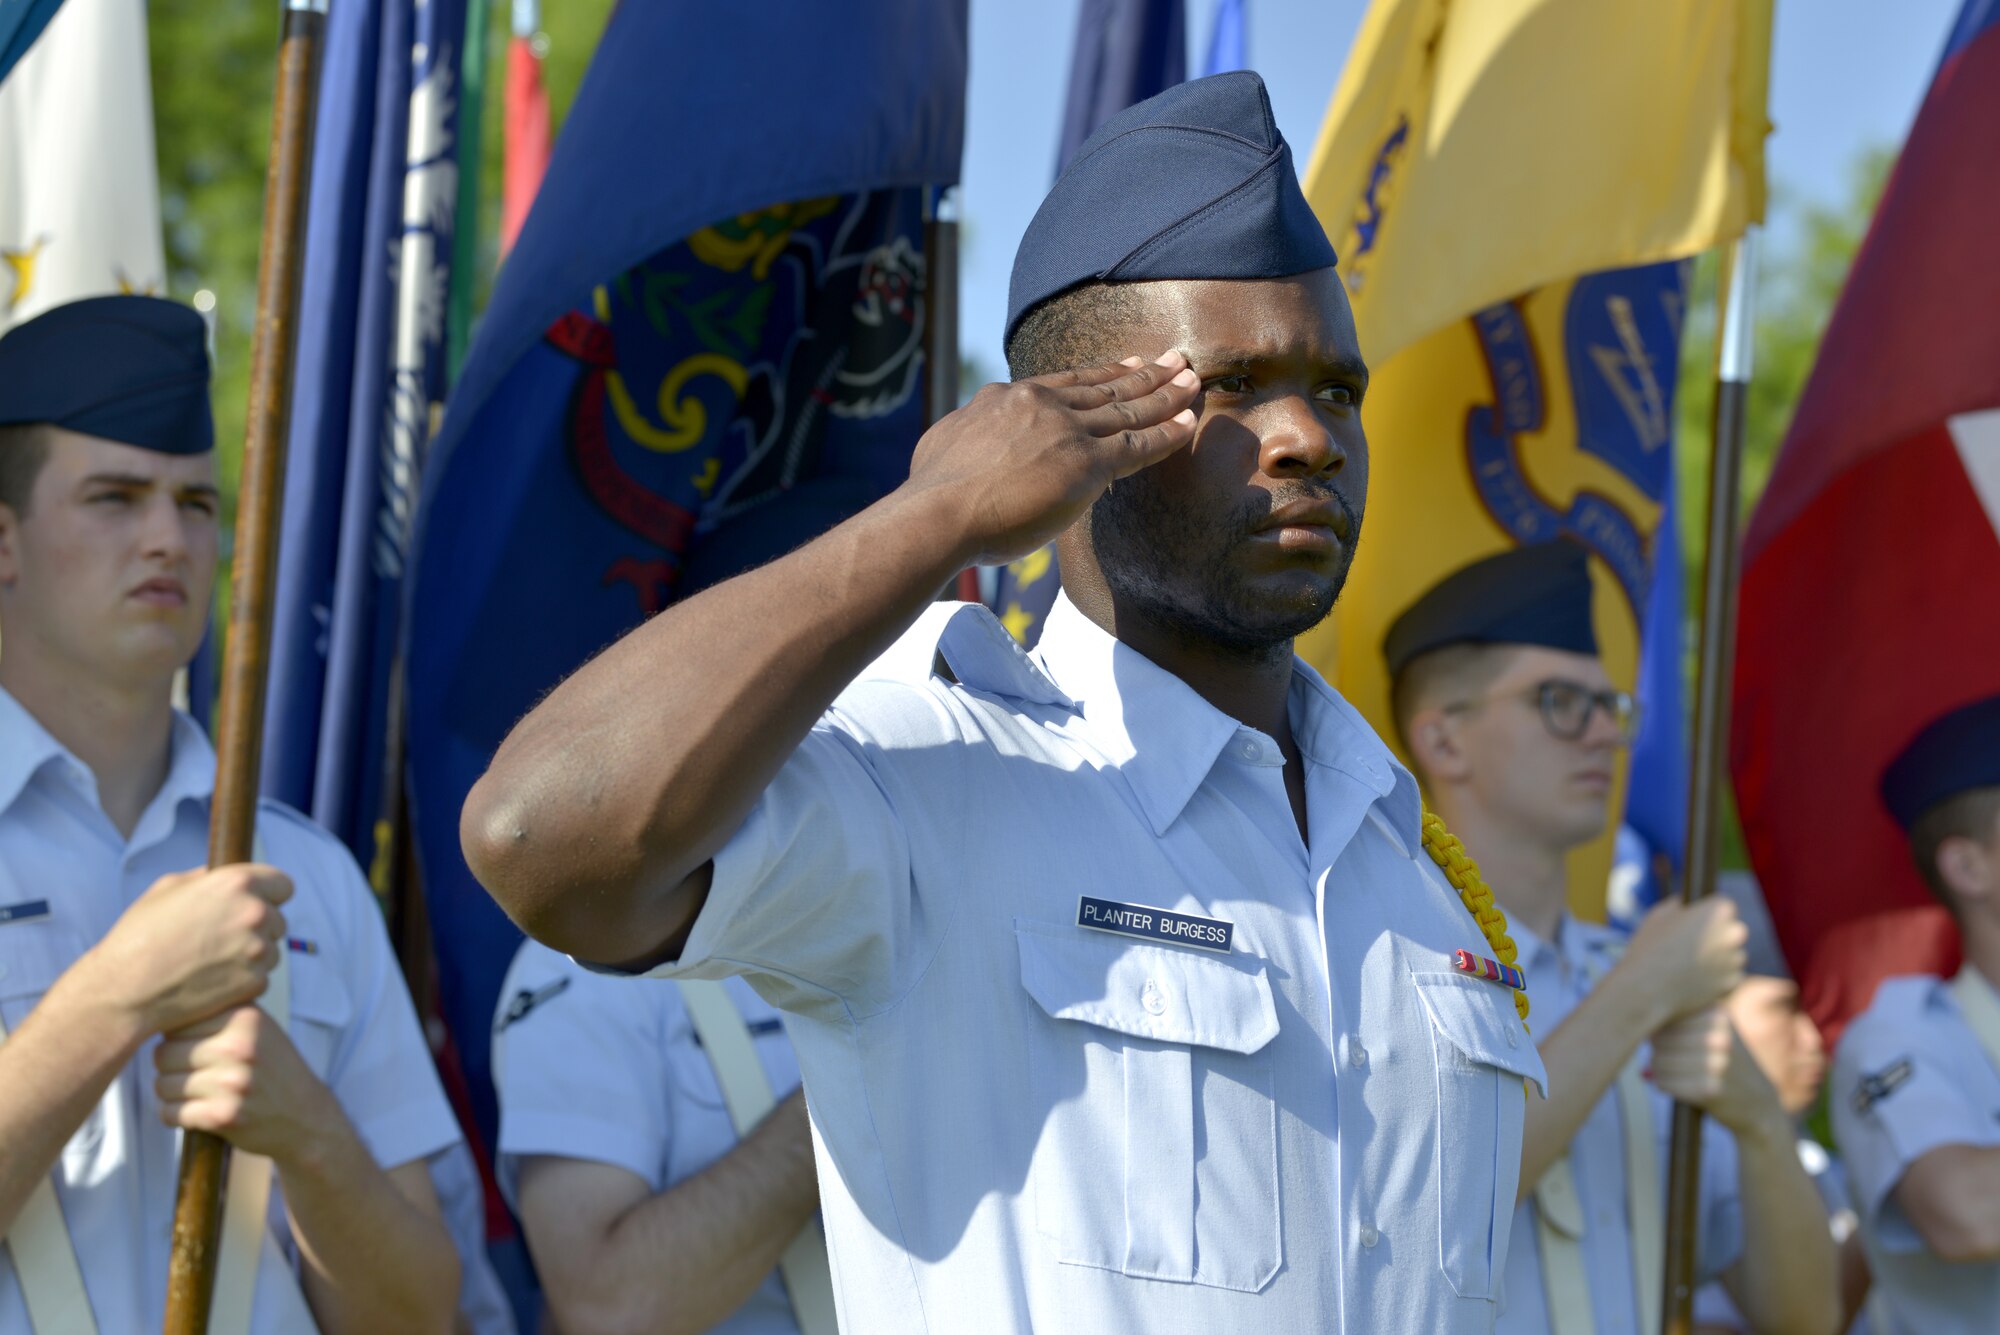 U.S. Air Force Airman 1st Class Tony Planter-Burgess, 336th Training Squadron student, salutes during the 81st Training Wing change of command ceremony on the Levitow Training Support Facility drill pad at Keesler Air Force Base, Mississippi, May 16, 2019. Col. Heather Blackwell assumed command from Col. Debra Lovette. (U.S. Air Force photo by Airman Seth Haddix)